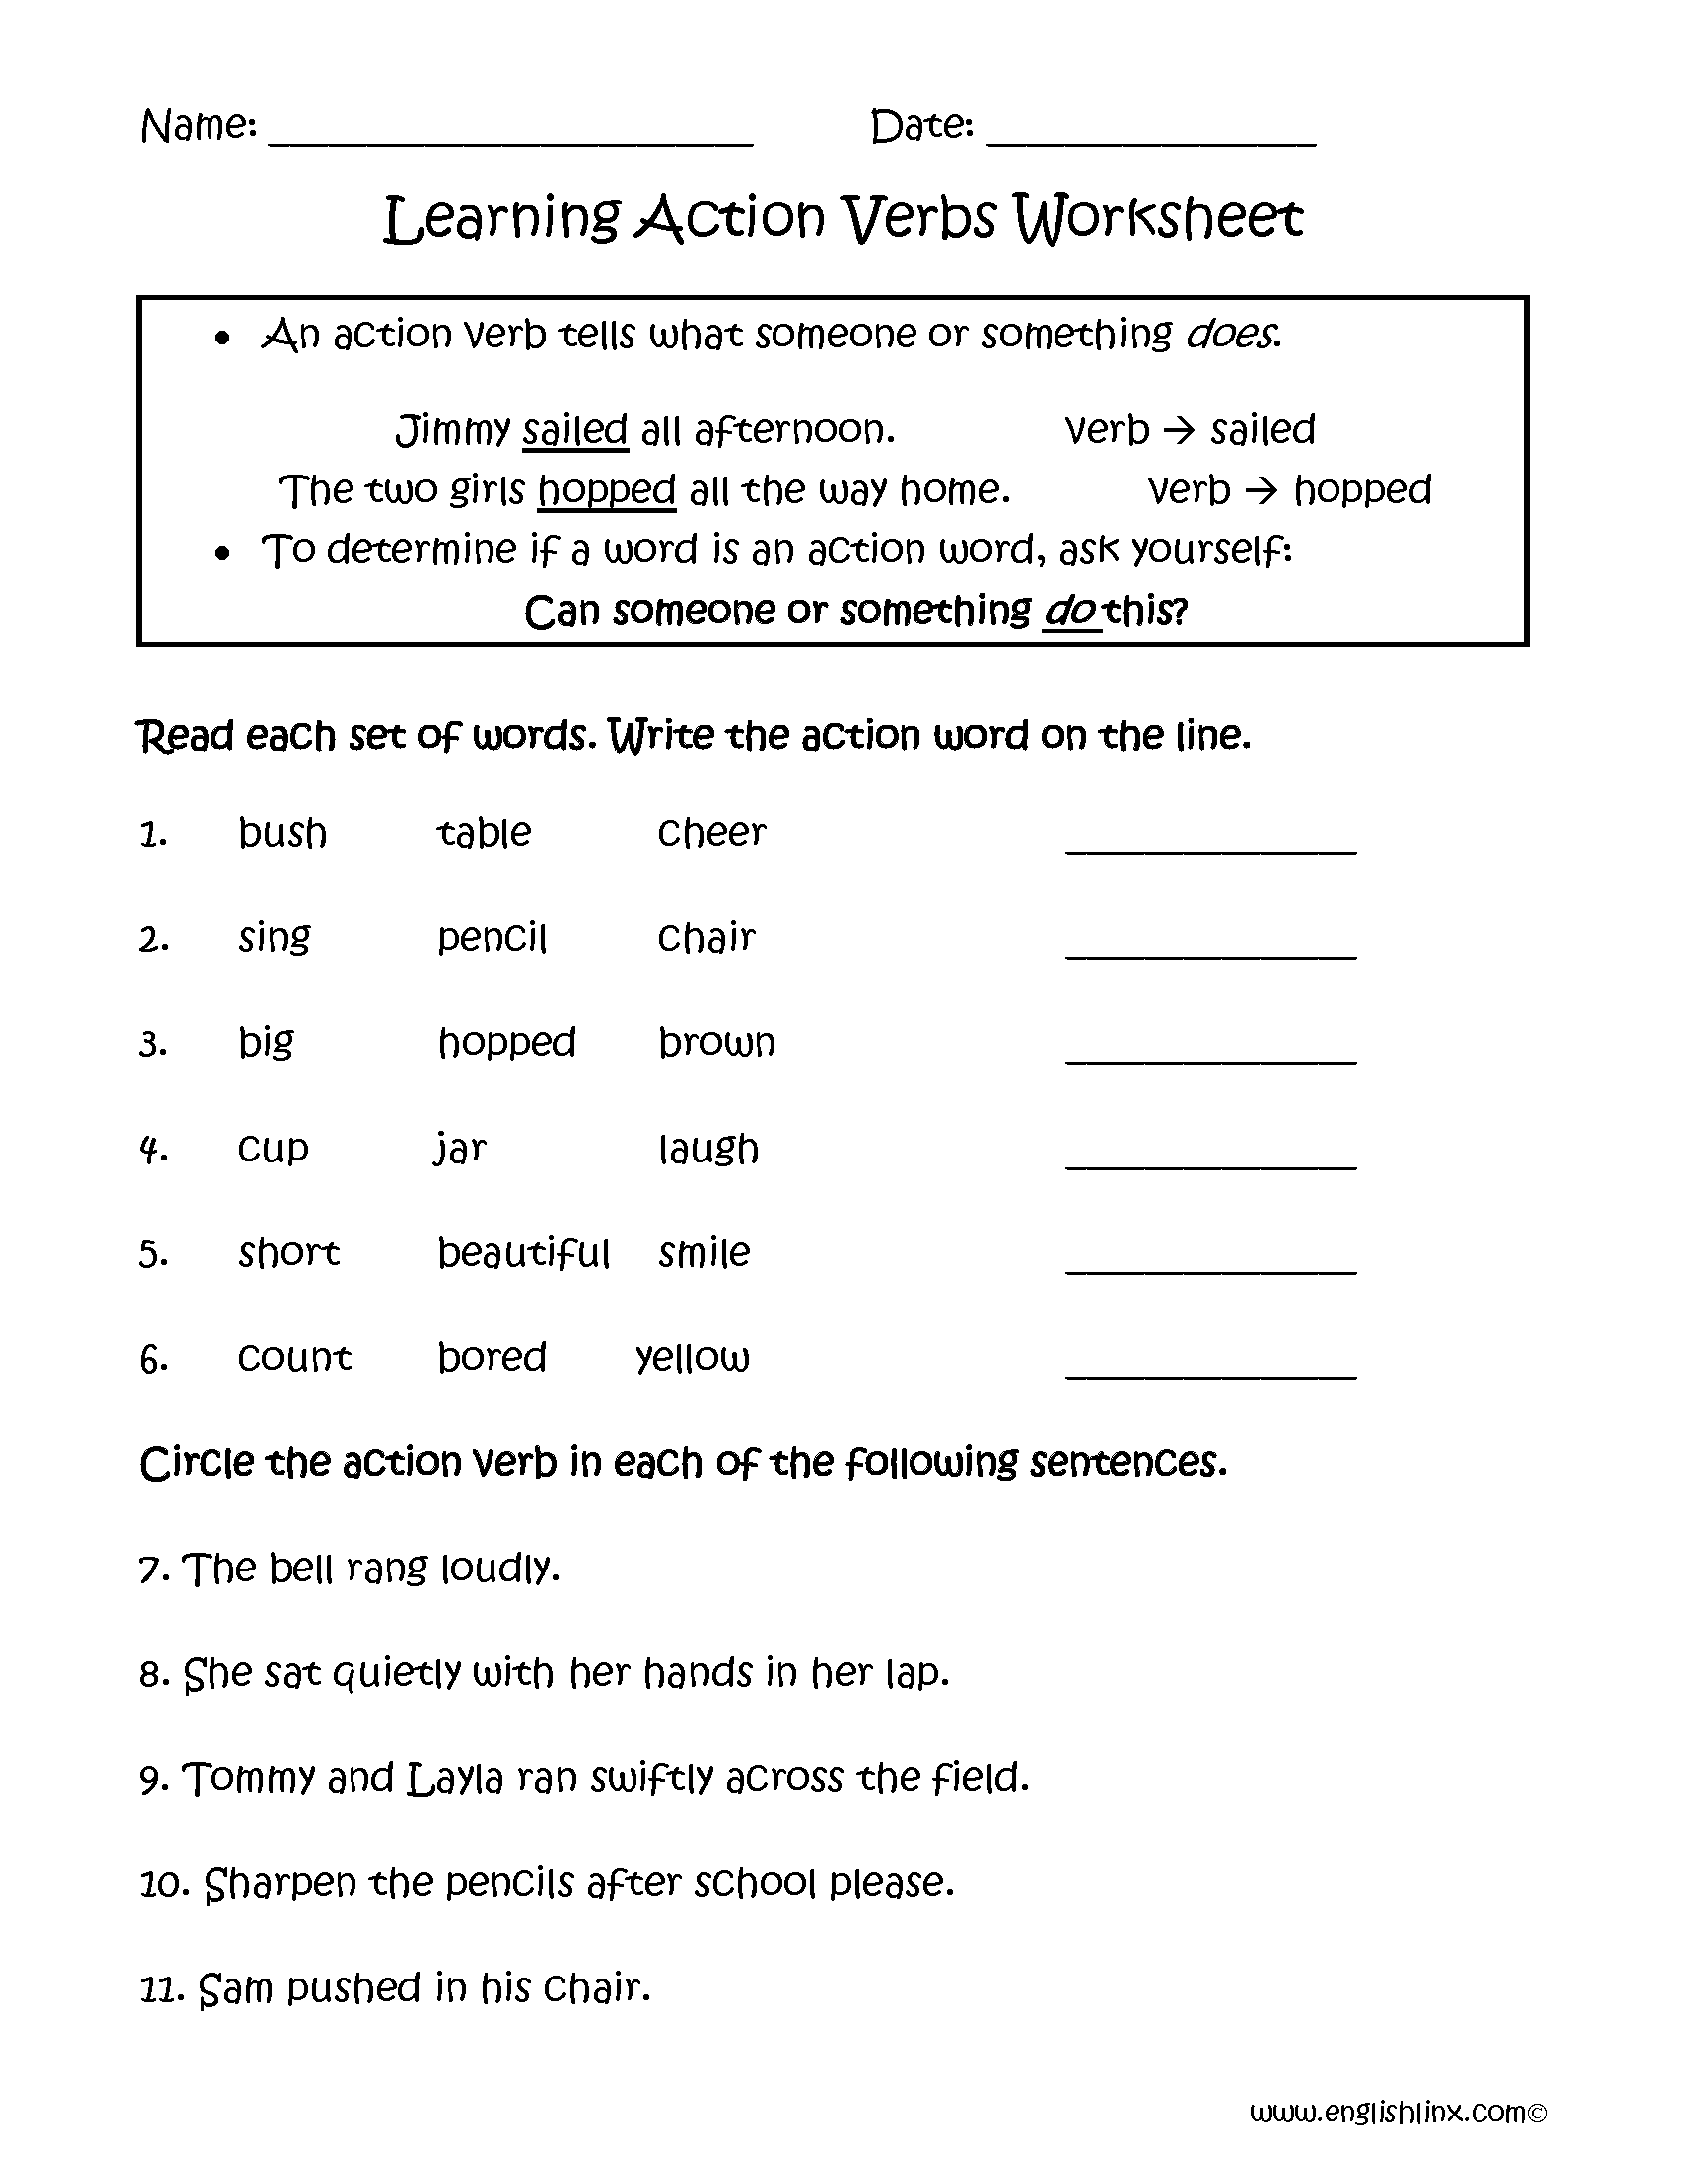 free-printable-worksheets-for-second-grade-math-word-problems-egypt-on-best-worksheets